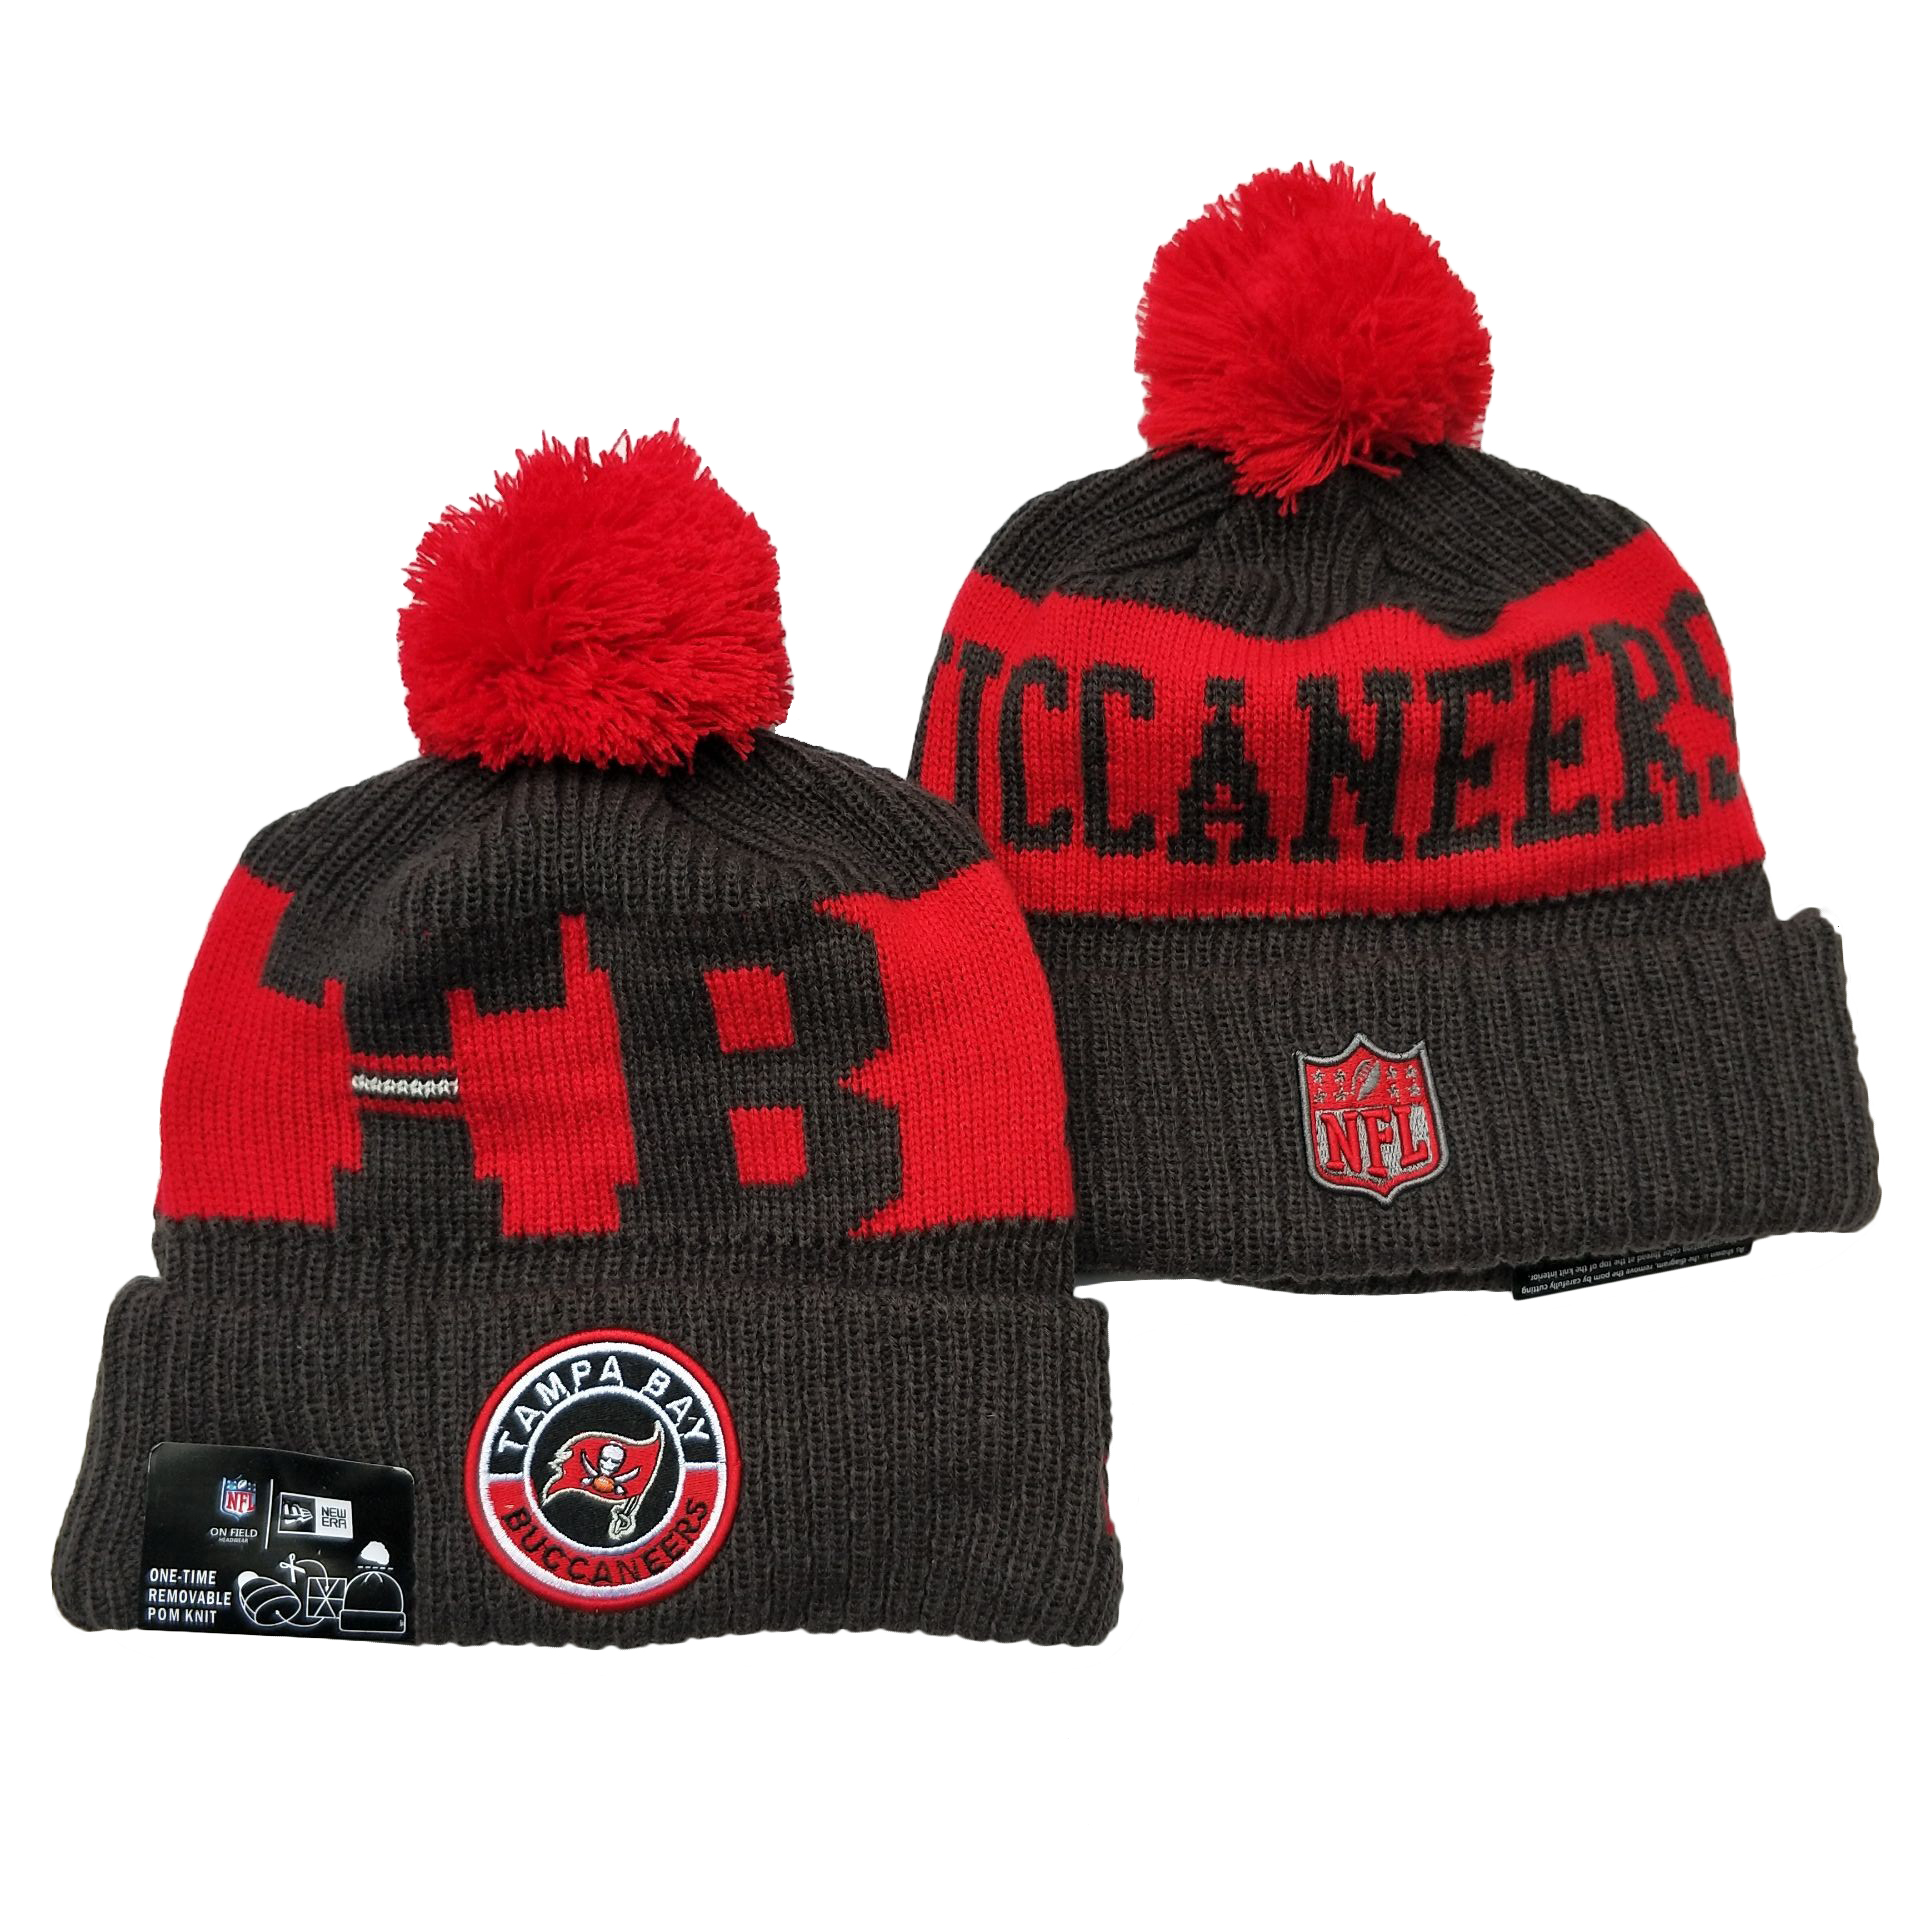 Tampa Bay Buccaneers Knit Hats 041